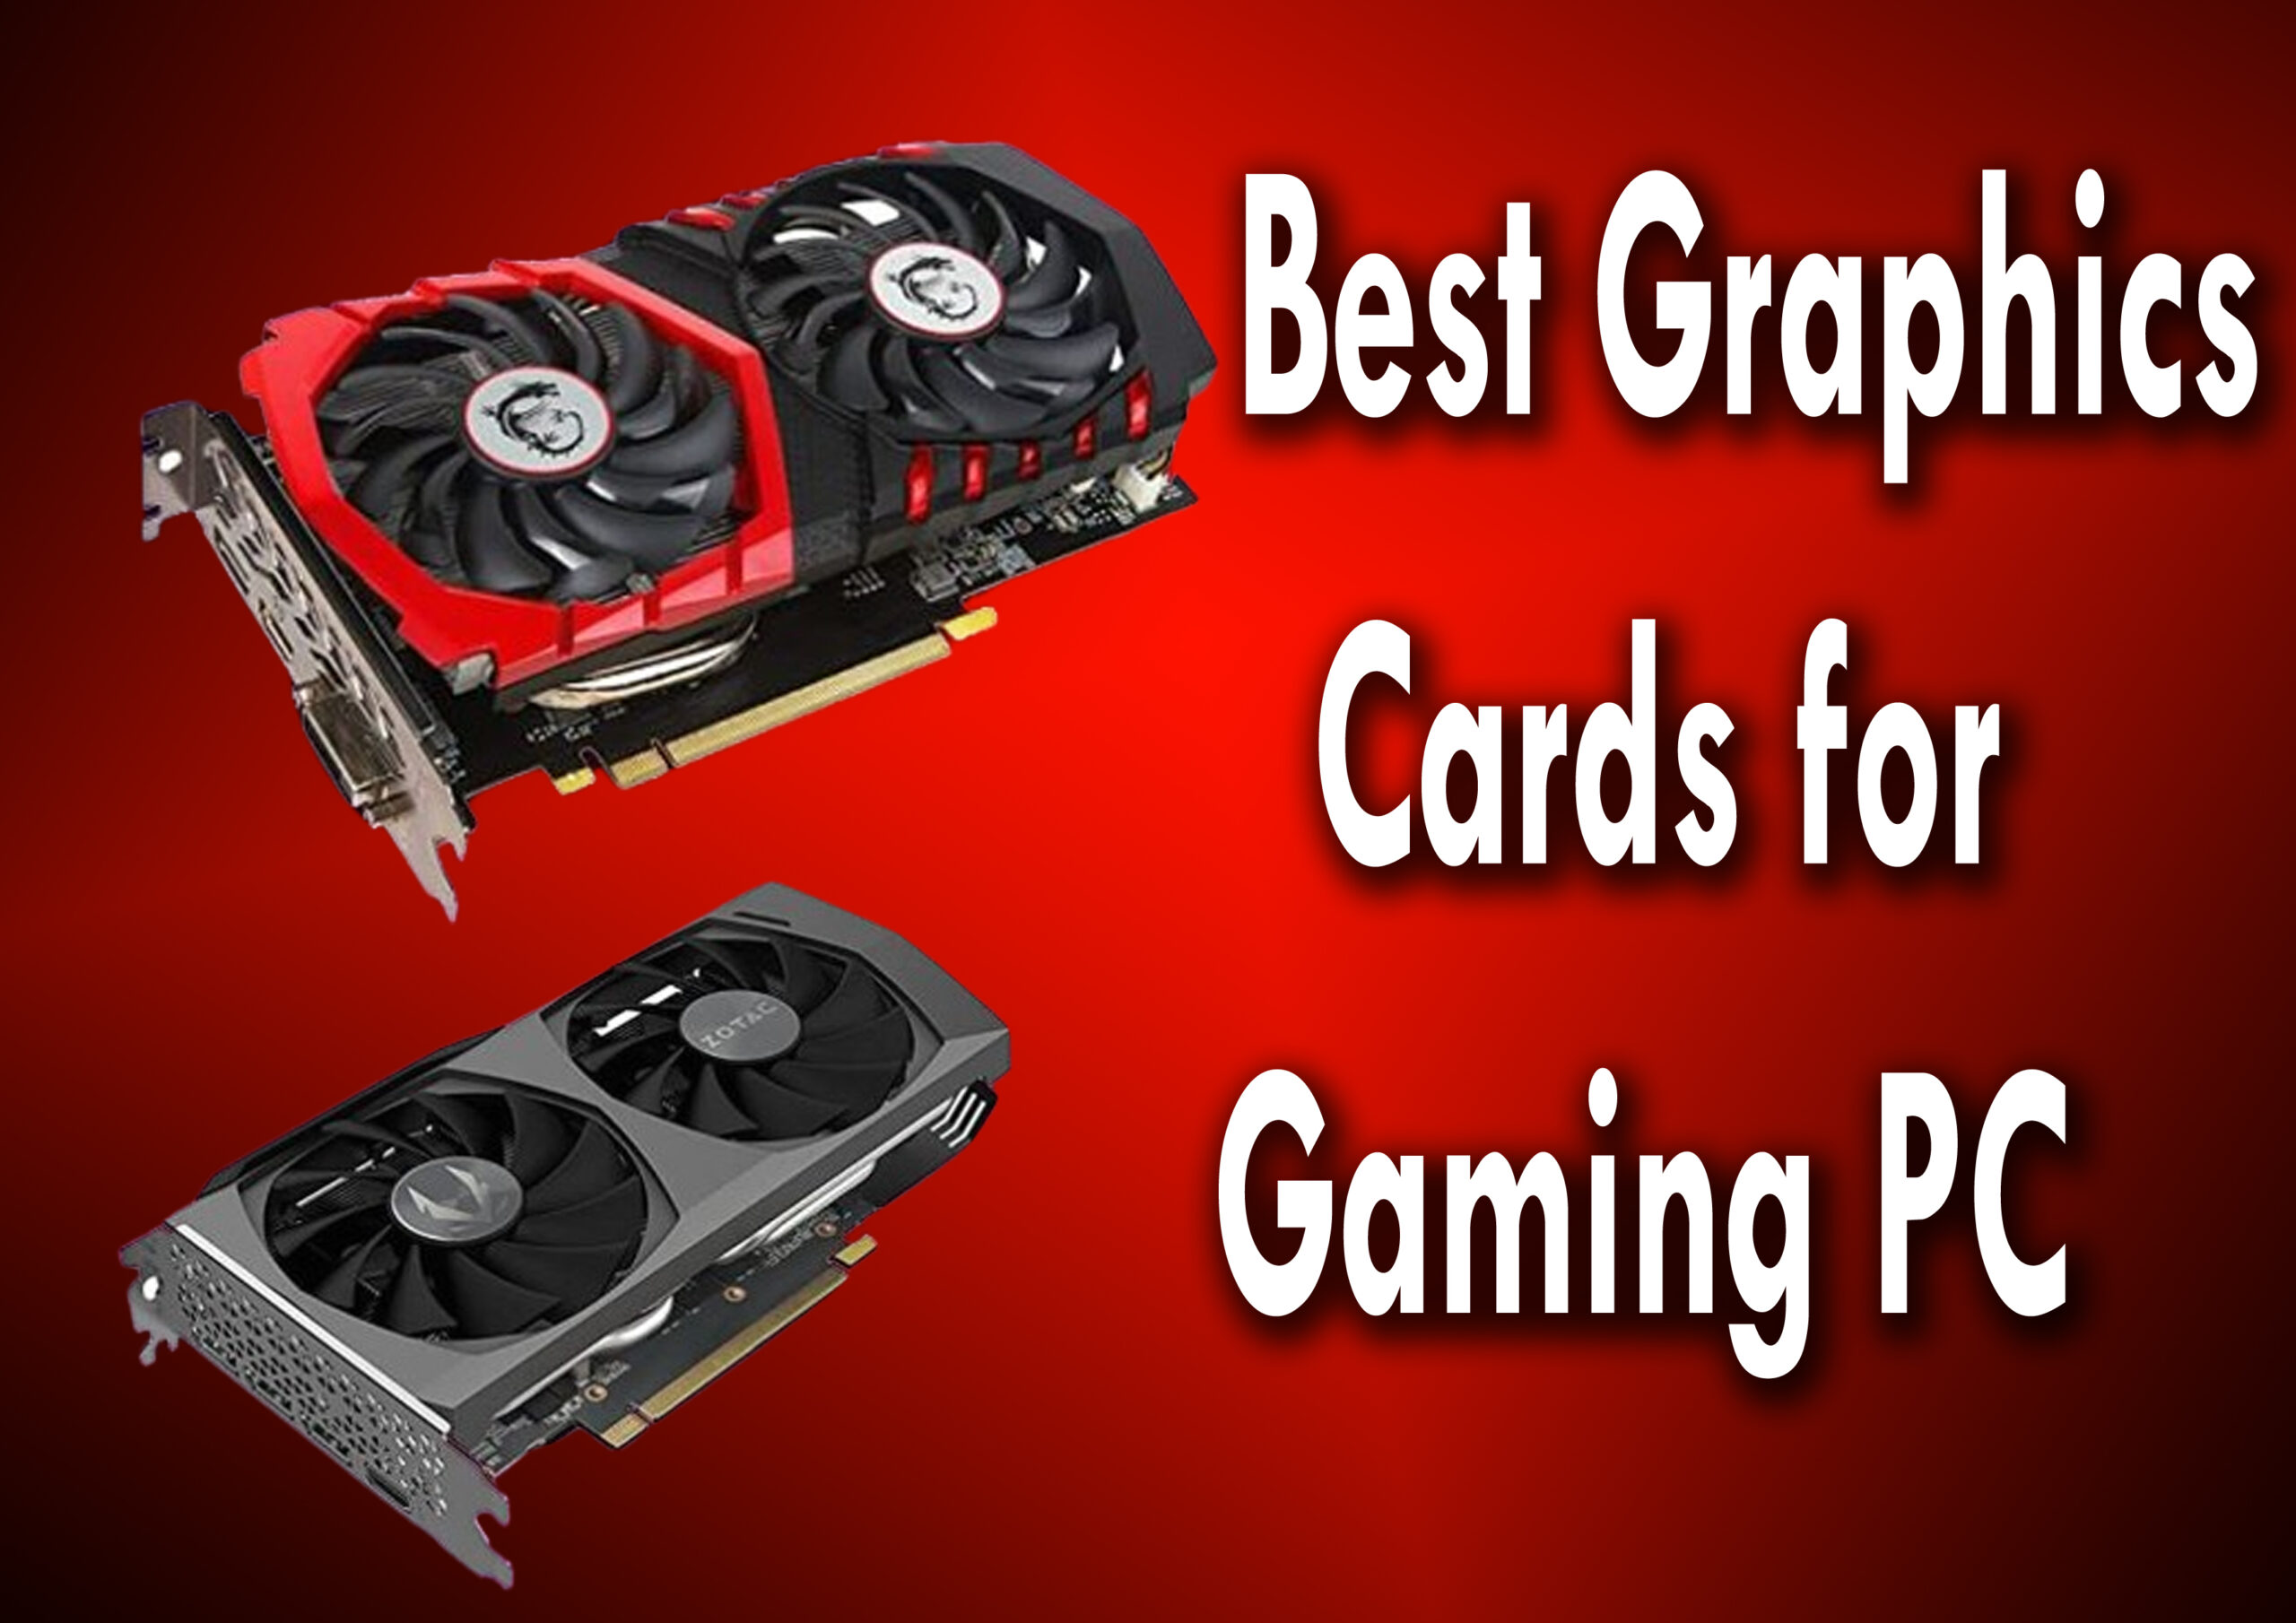 Best Graphics Cards for Gaming PC